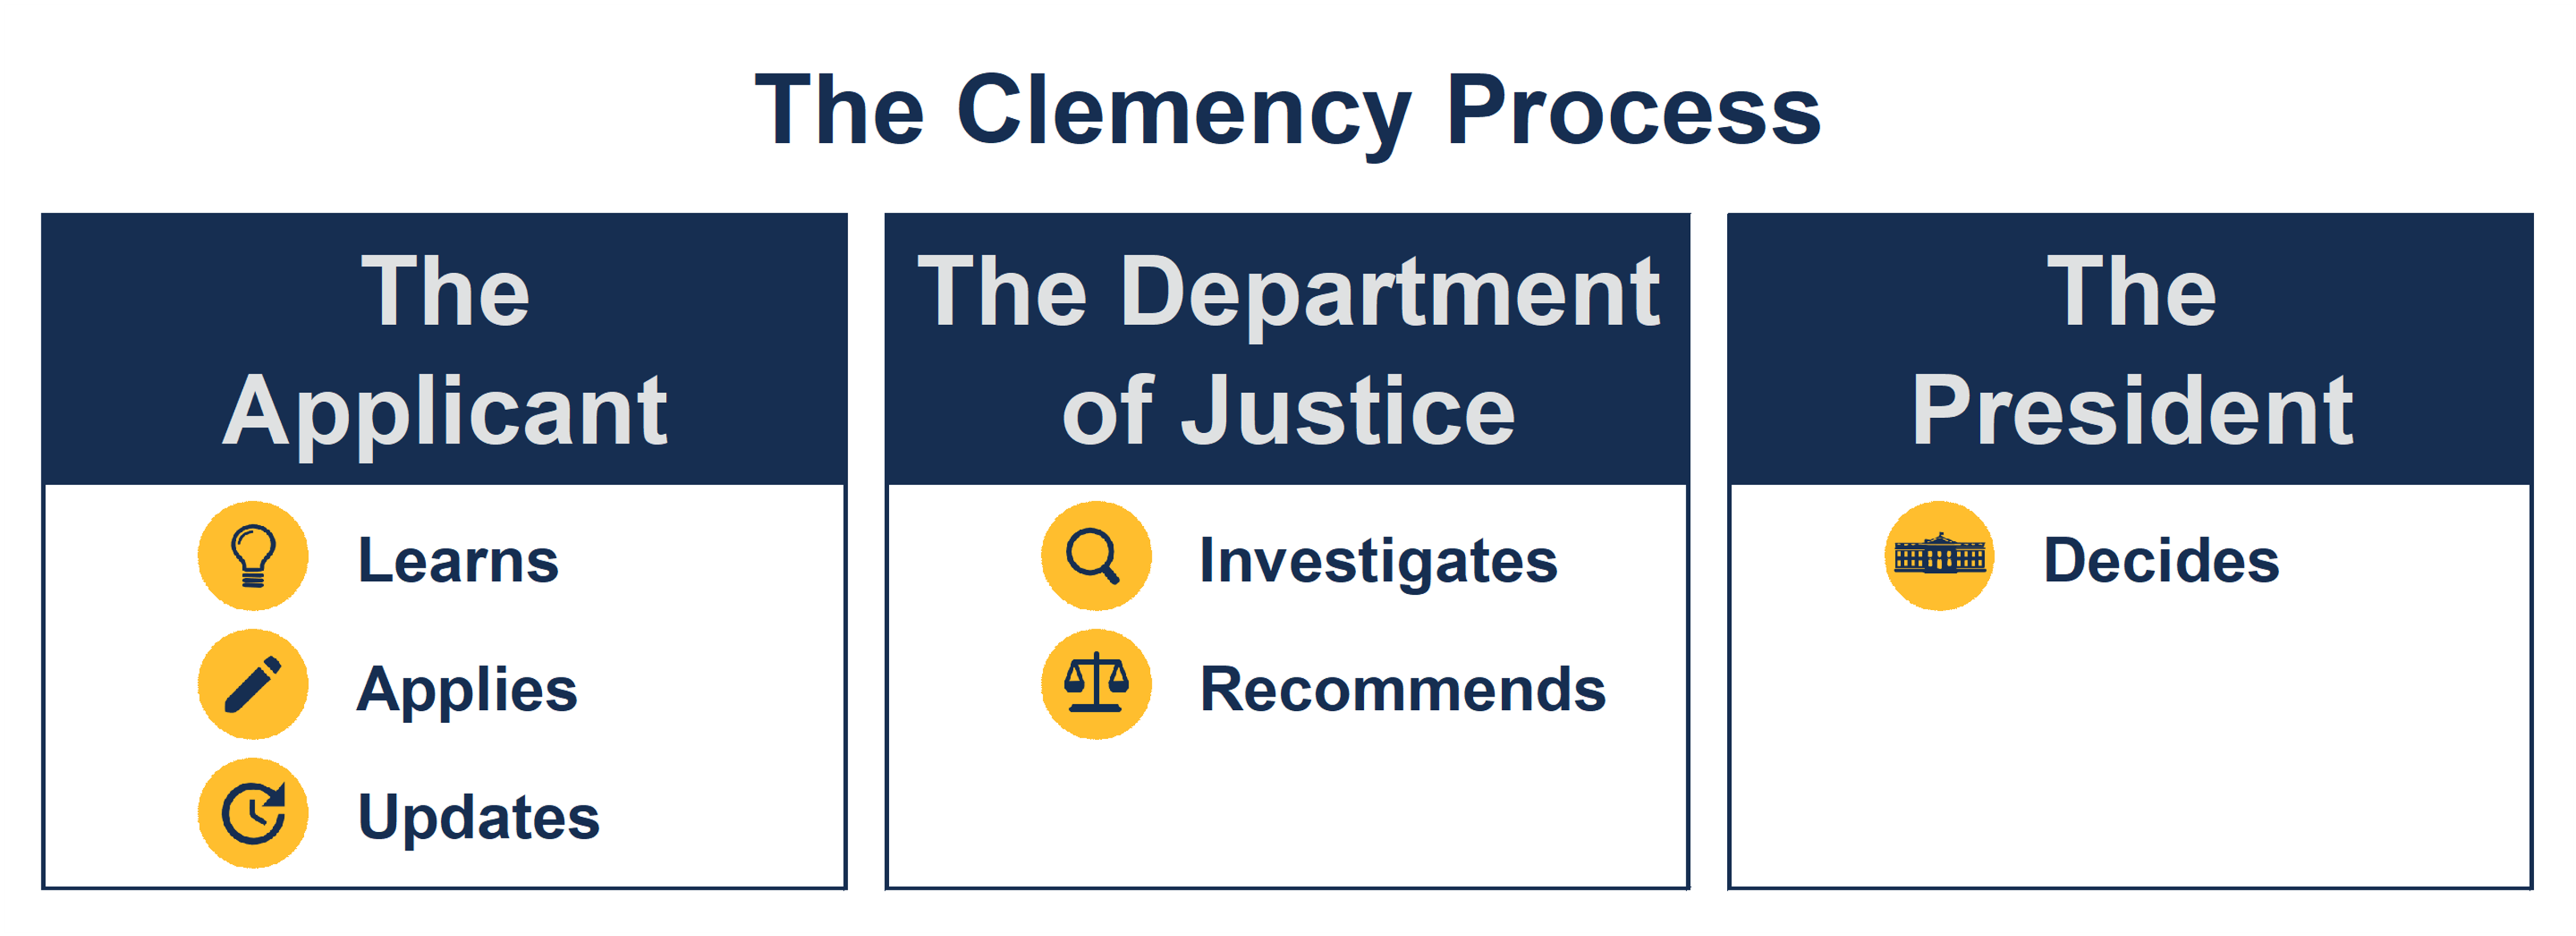 The Clemency Process. The applicant learns, applies, and updates. The Department of Justice investigates and recommends. The President decides.